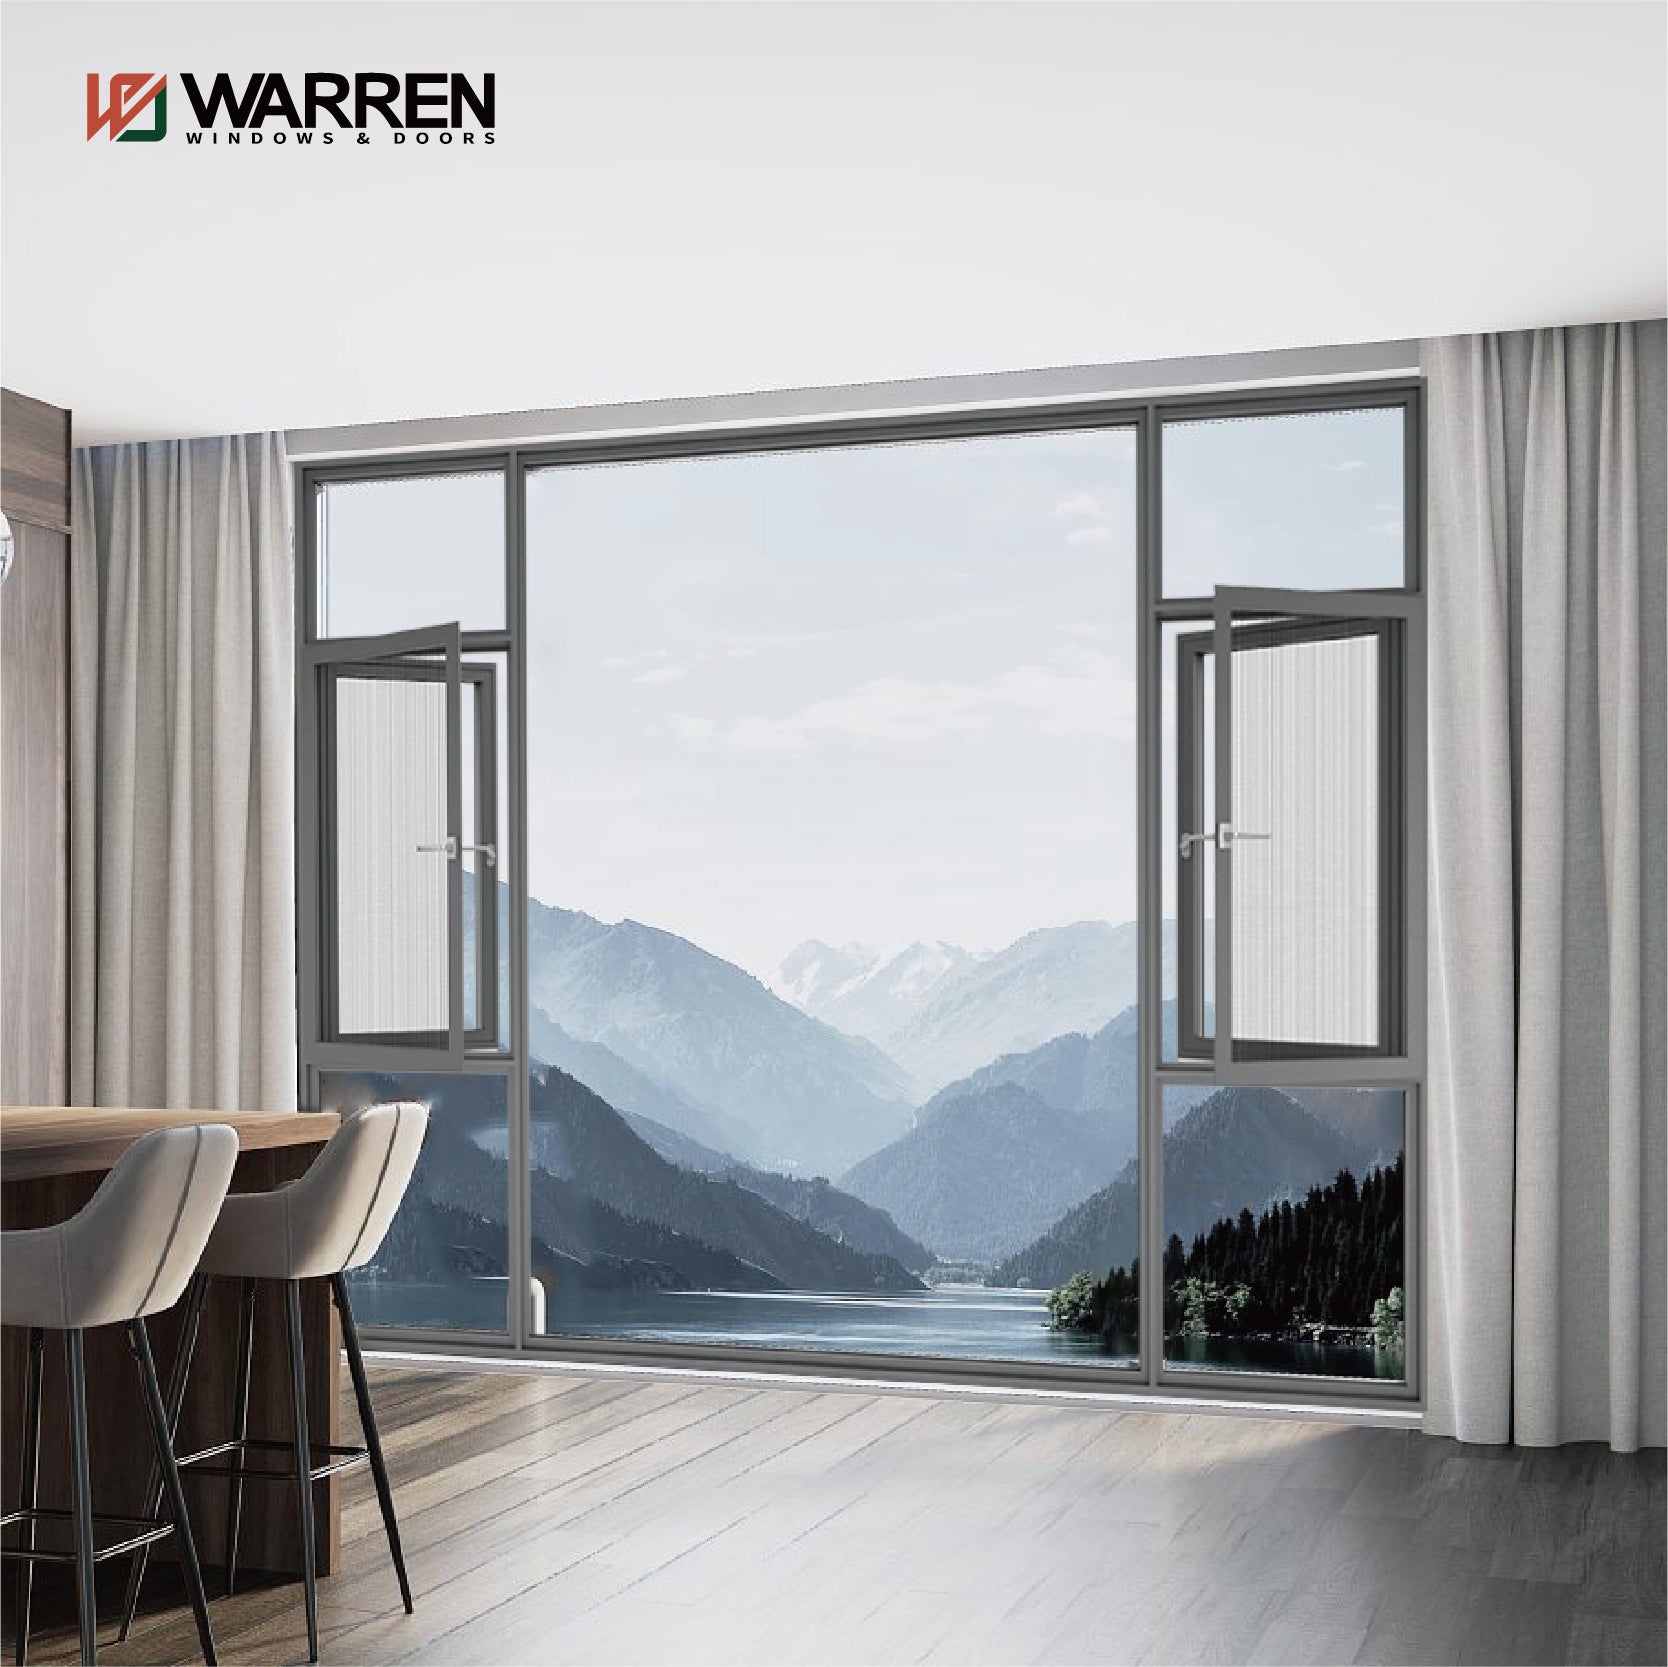 Warren 2 foot window hot sale high performance thermal break casement awning window with fully tempered glass